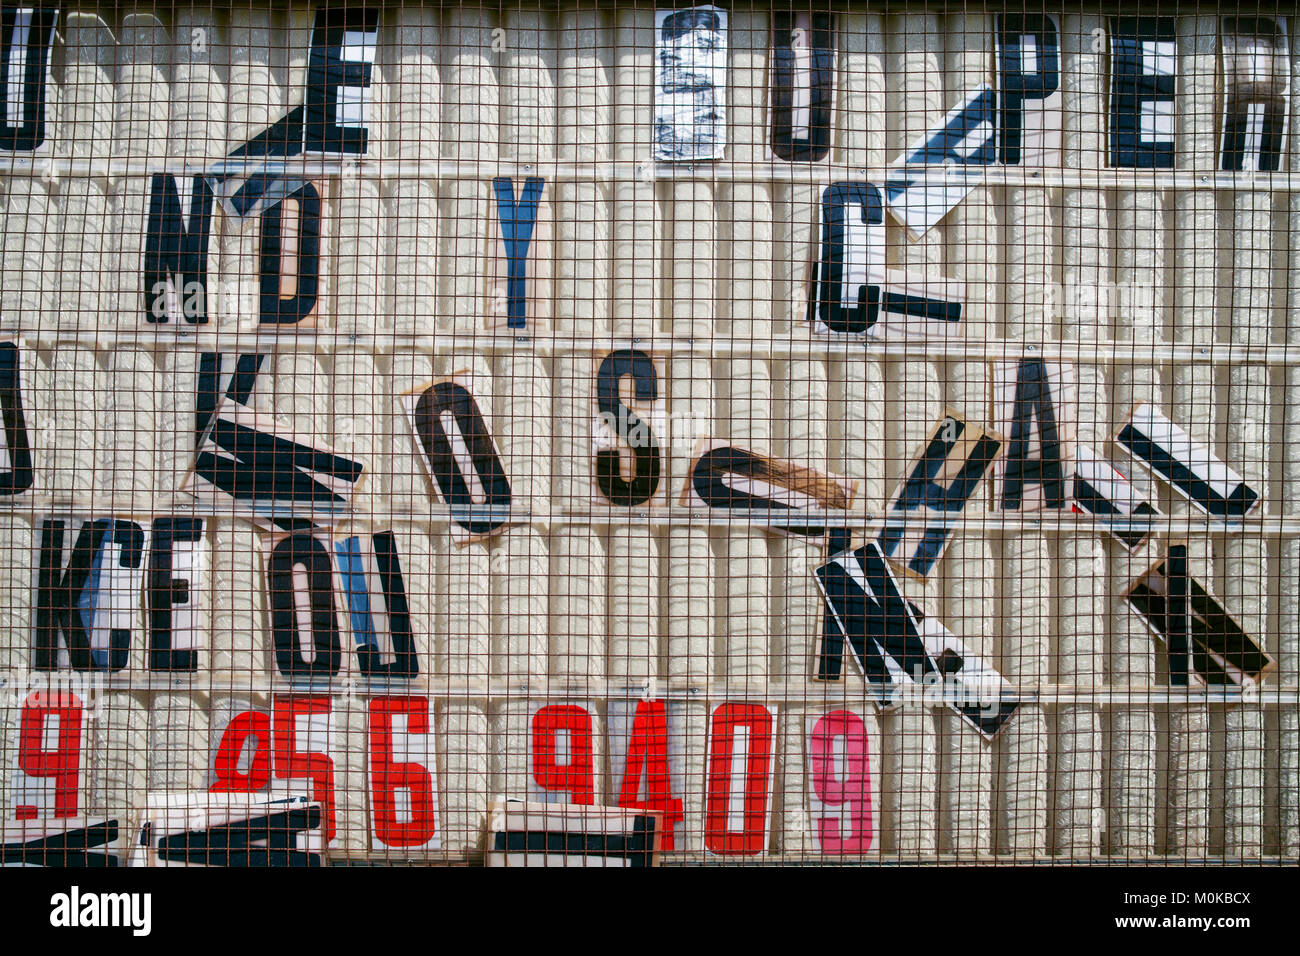 Message sign with jumbled letters and numbers; Rockwood, Ontario, Canada Stock Photo